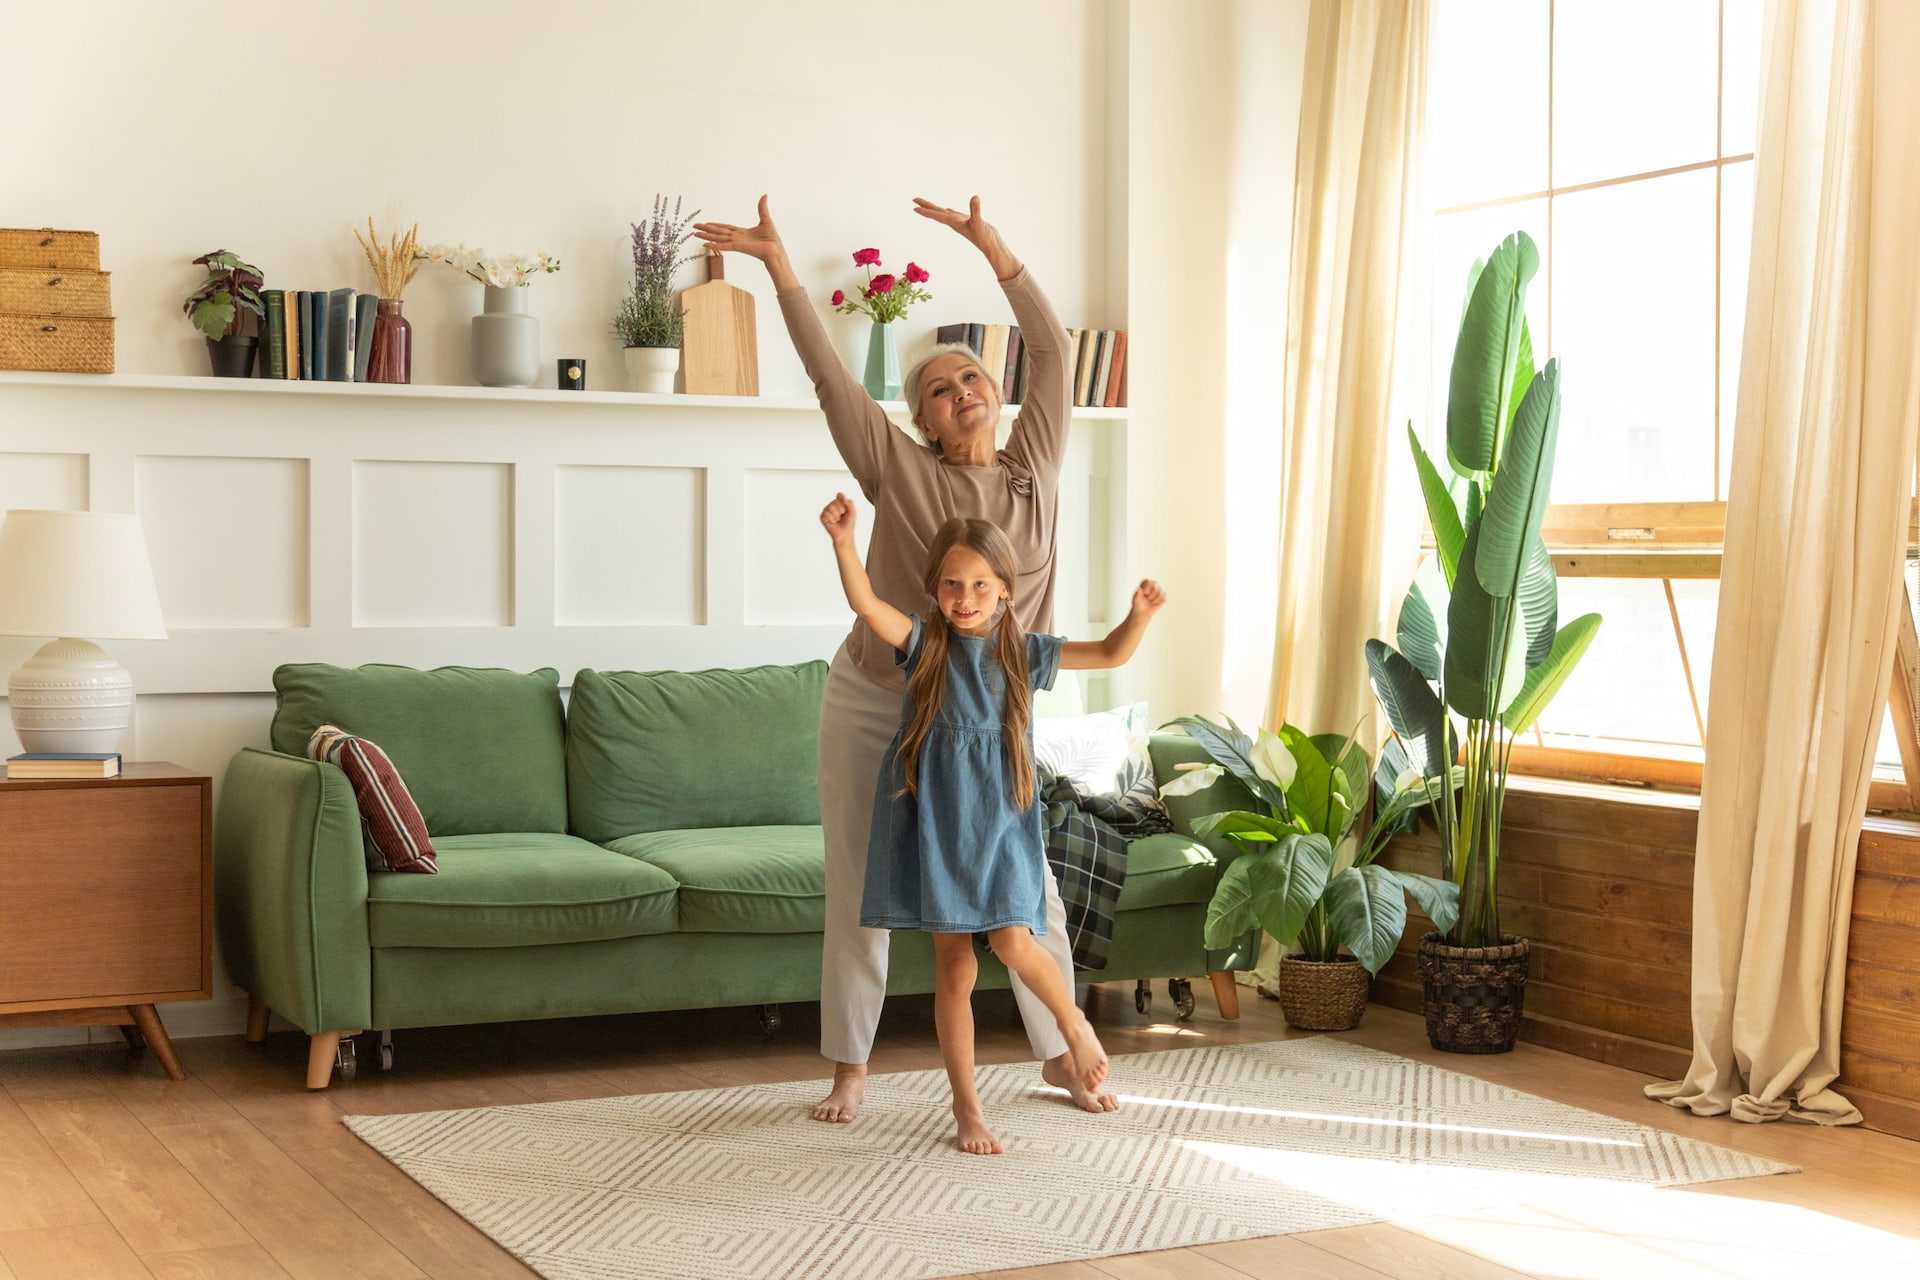 Photo of an elderly lady and a young girl dancing together in a front room.